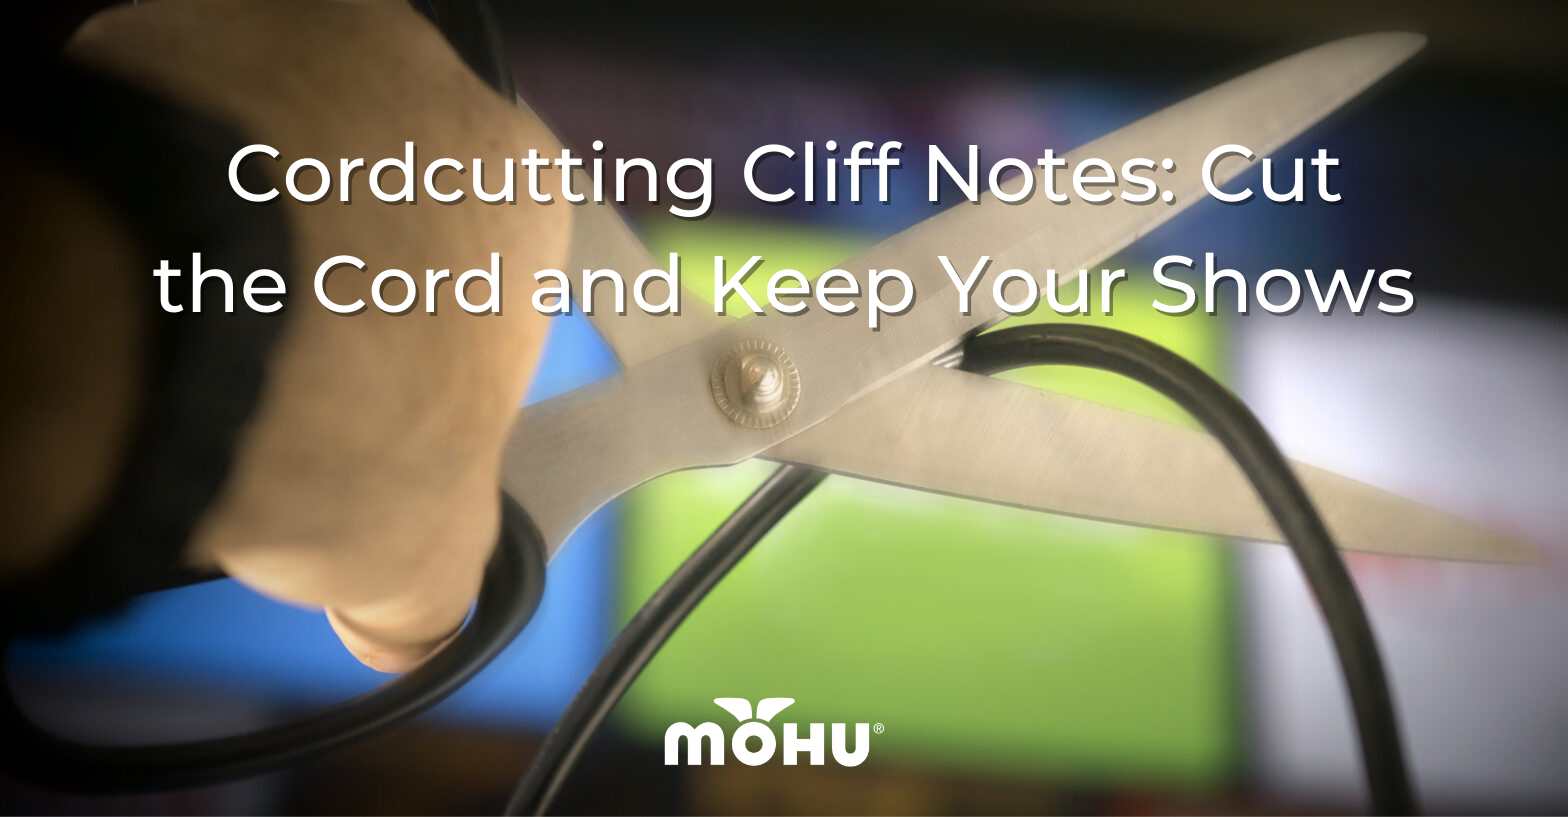 Hands holding a pair of scissors cutting a cable, Cordcutting Cliff Notes Cut the Cord and Keep Your Shows, Mohu